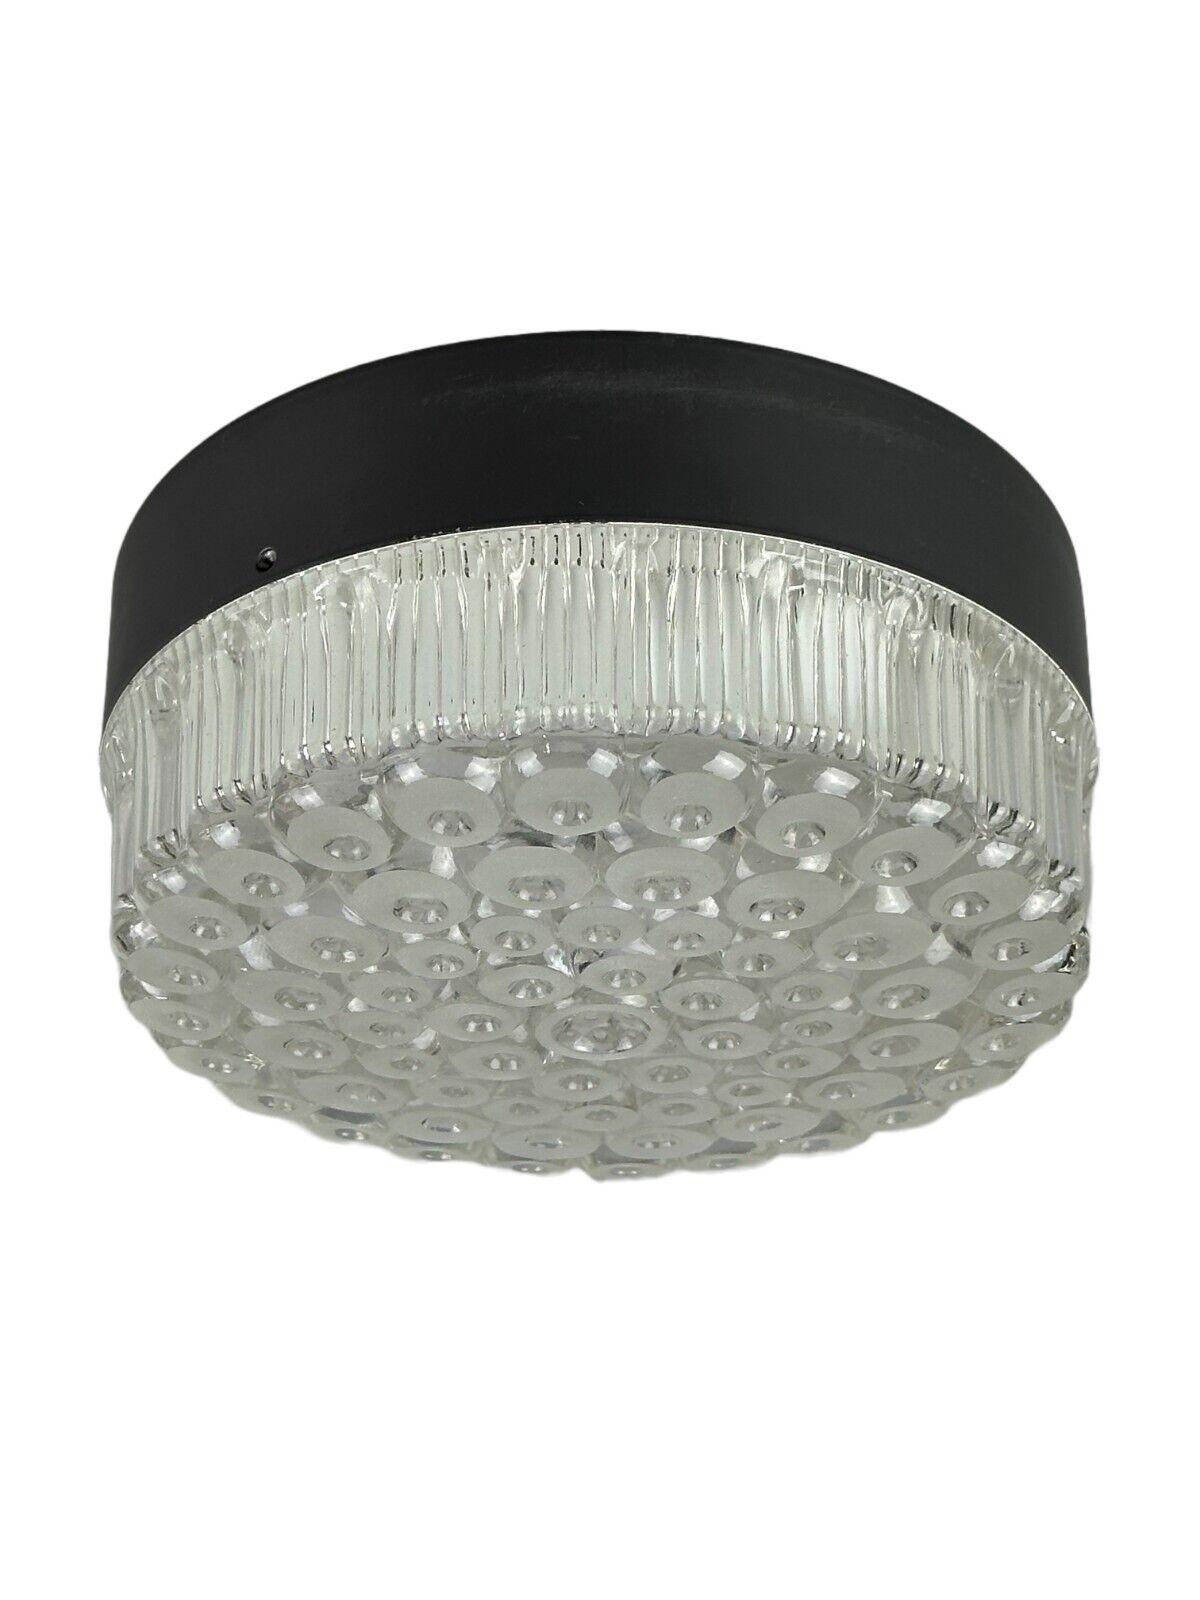 60s 70s ceiling lamp Plafoniere Flush Mount by Staff Leuchten Germany

Object: Plafoniere

Manufacturer: Staff Lights

Condition: good

Age: around 1960-1970

Dimensions:

Diameter = 20cm
Height = 10.5cm

Material: glass, metal

Other notes:

E27